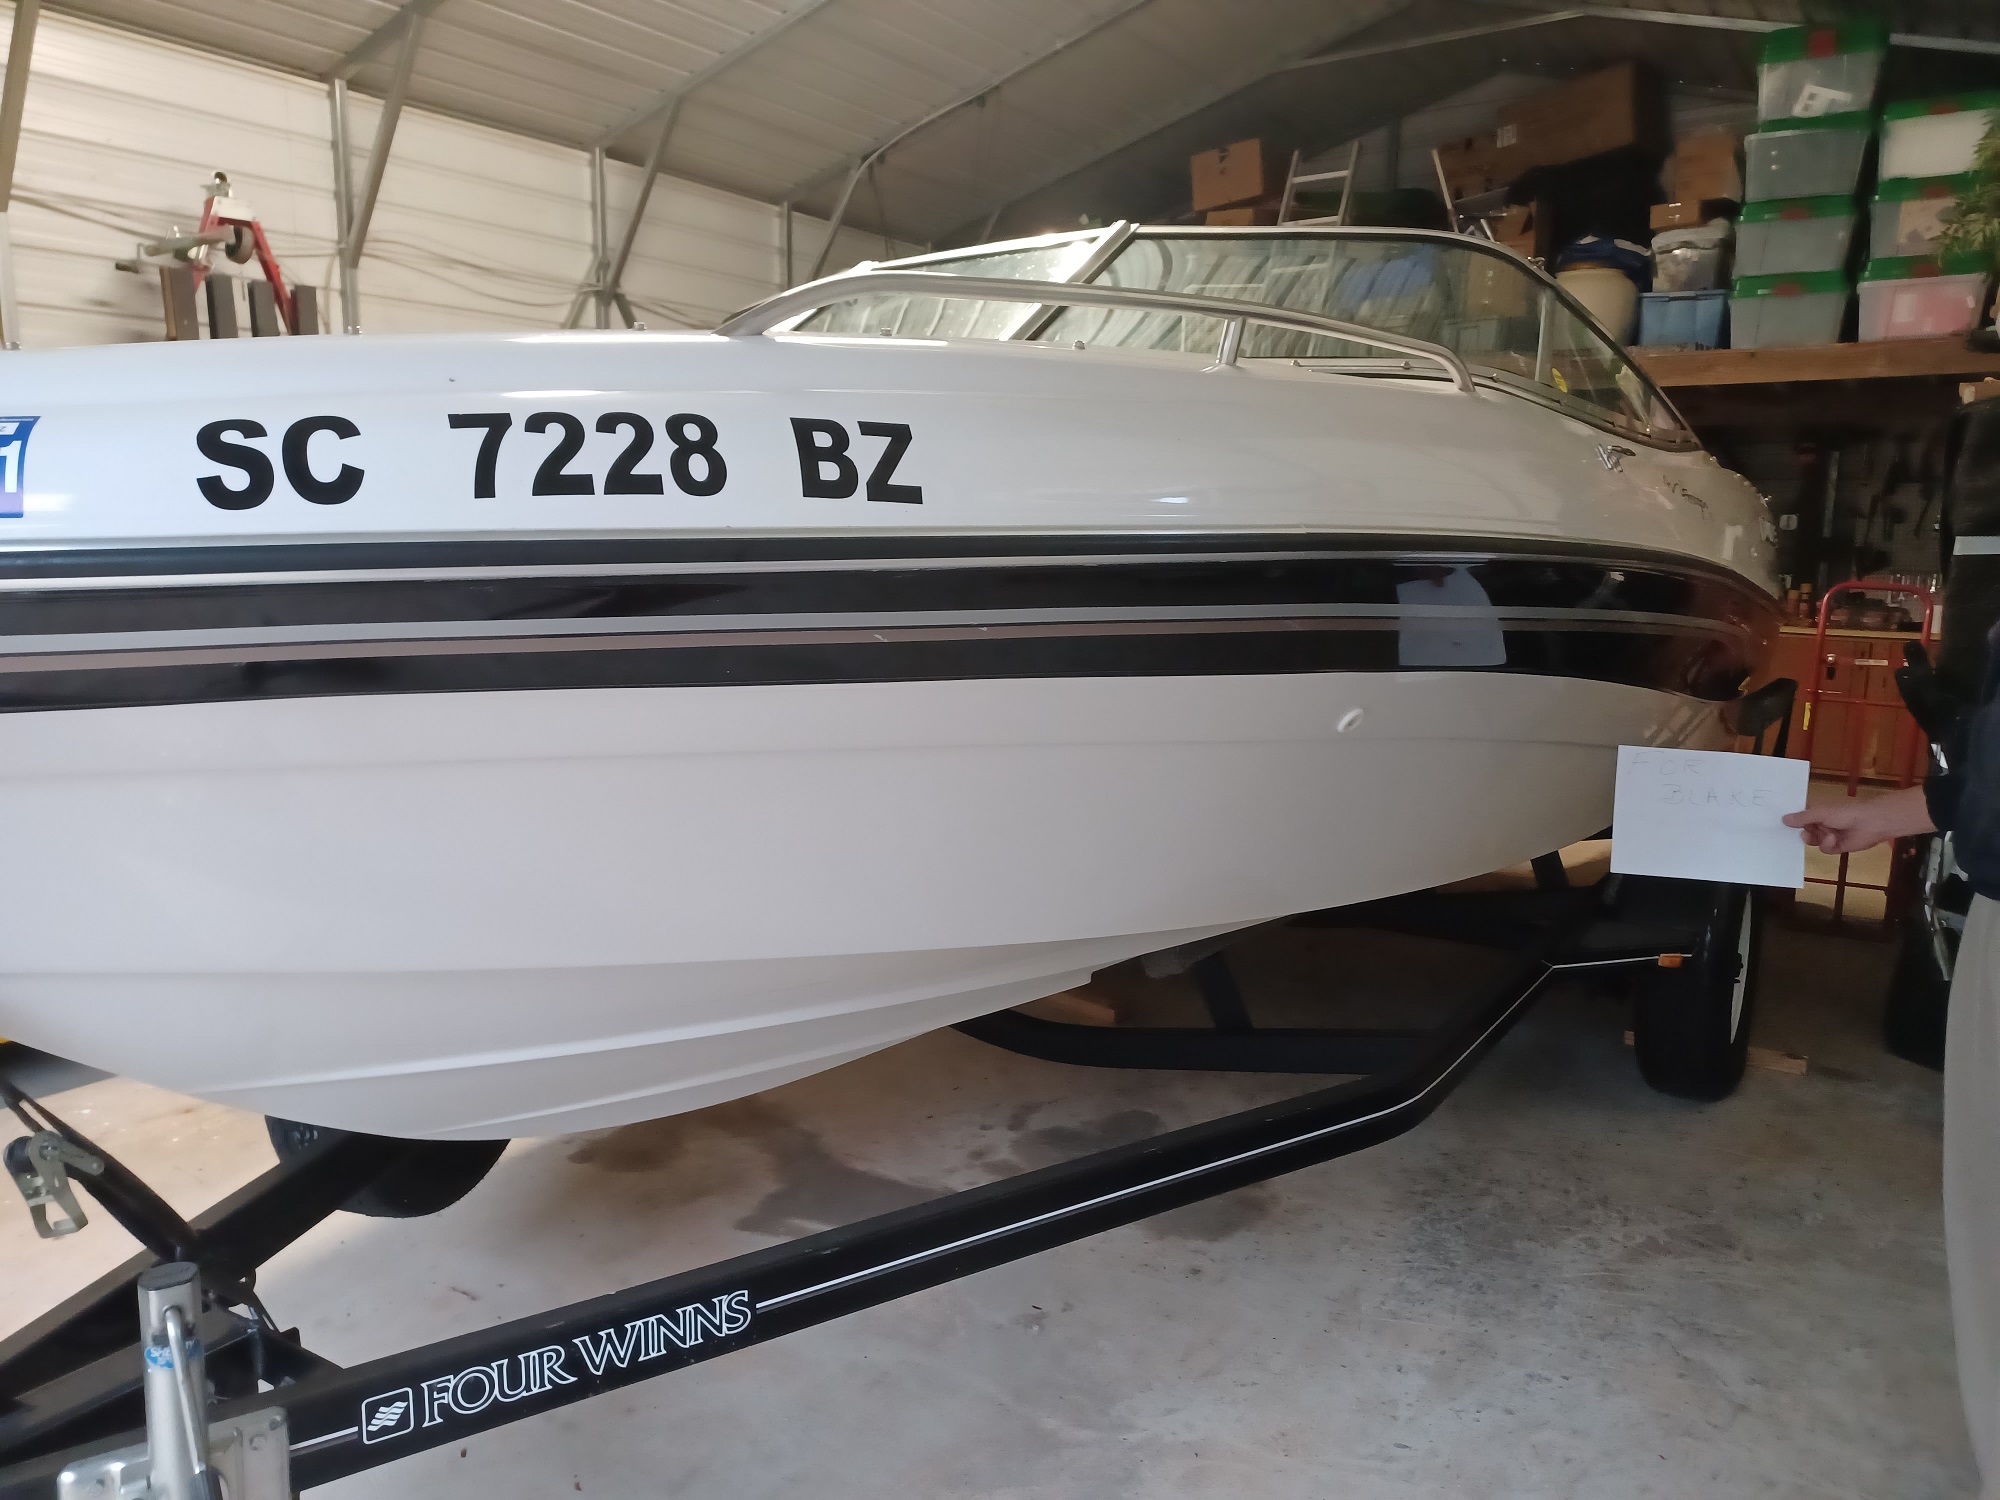 1999 FOUR WINNS 190 Horizon Power boat for sale in Peachtree Cty, GA - image 8 